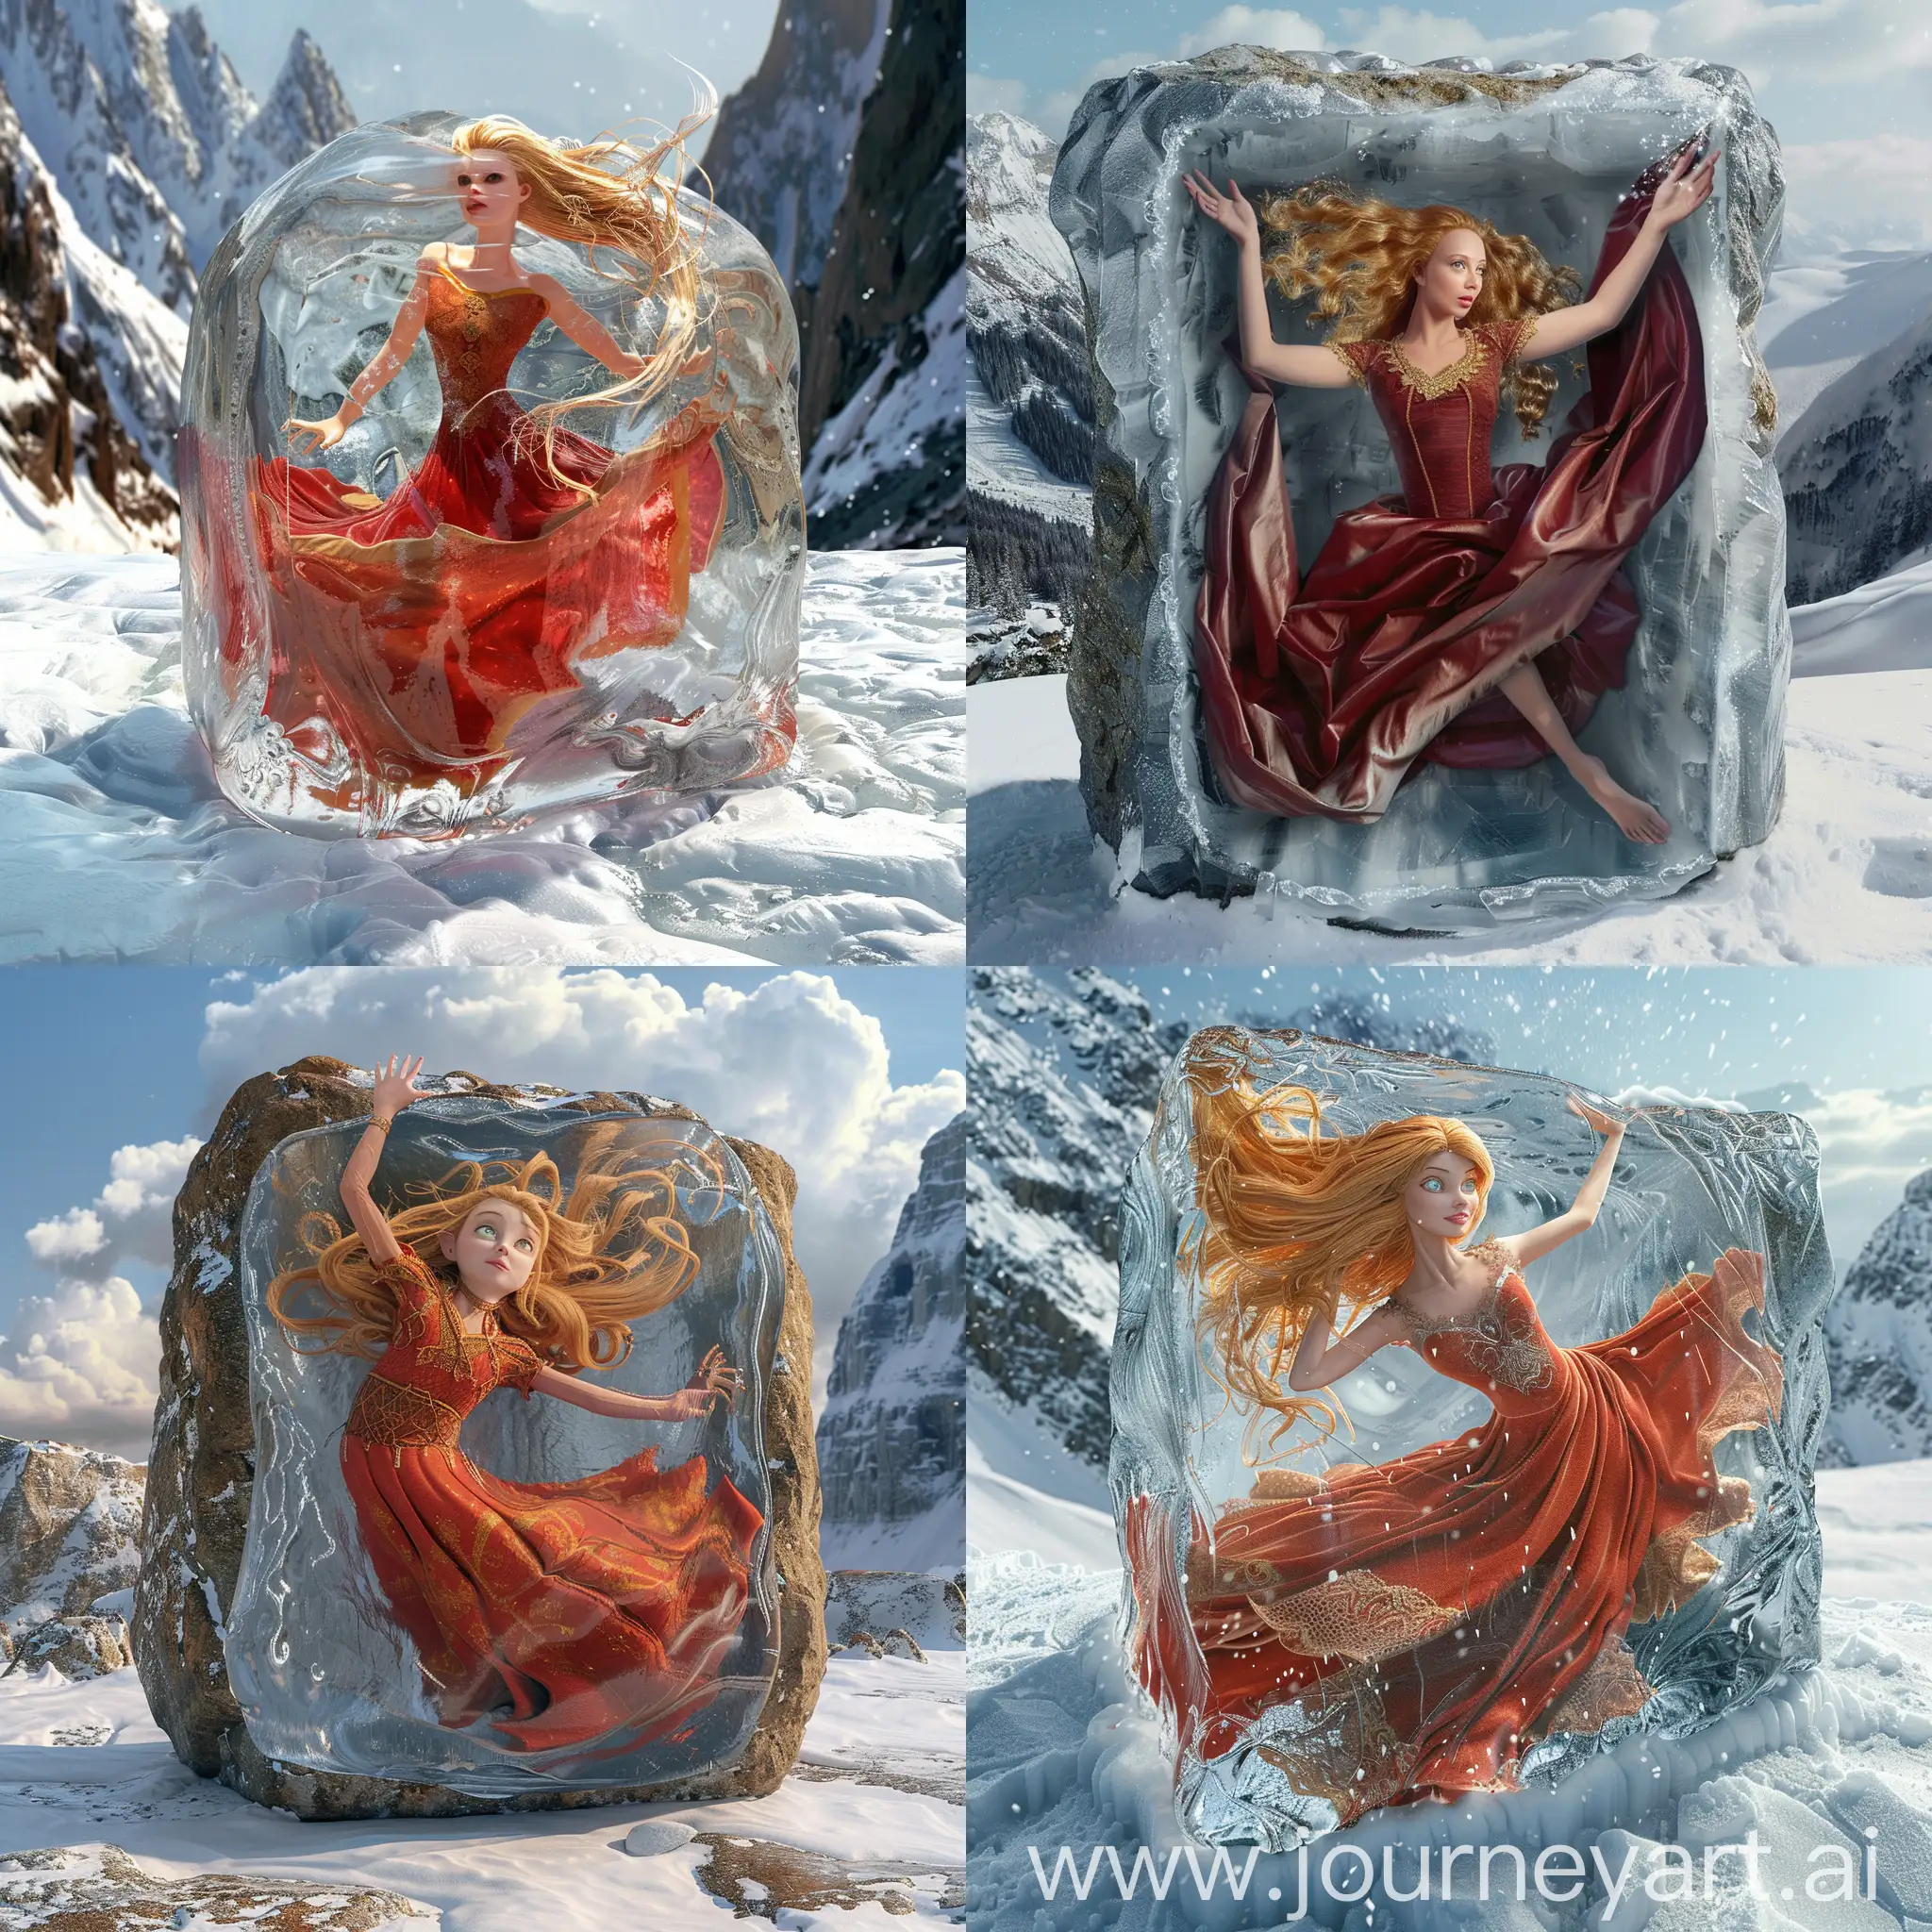 Enchanted-Medieval-Queen-Encased-in-Icy-Mountain